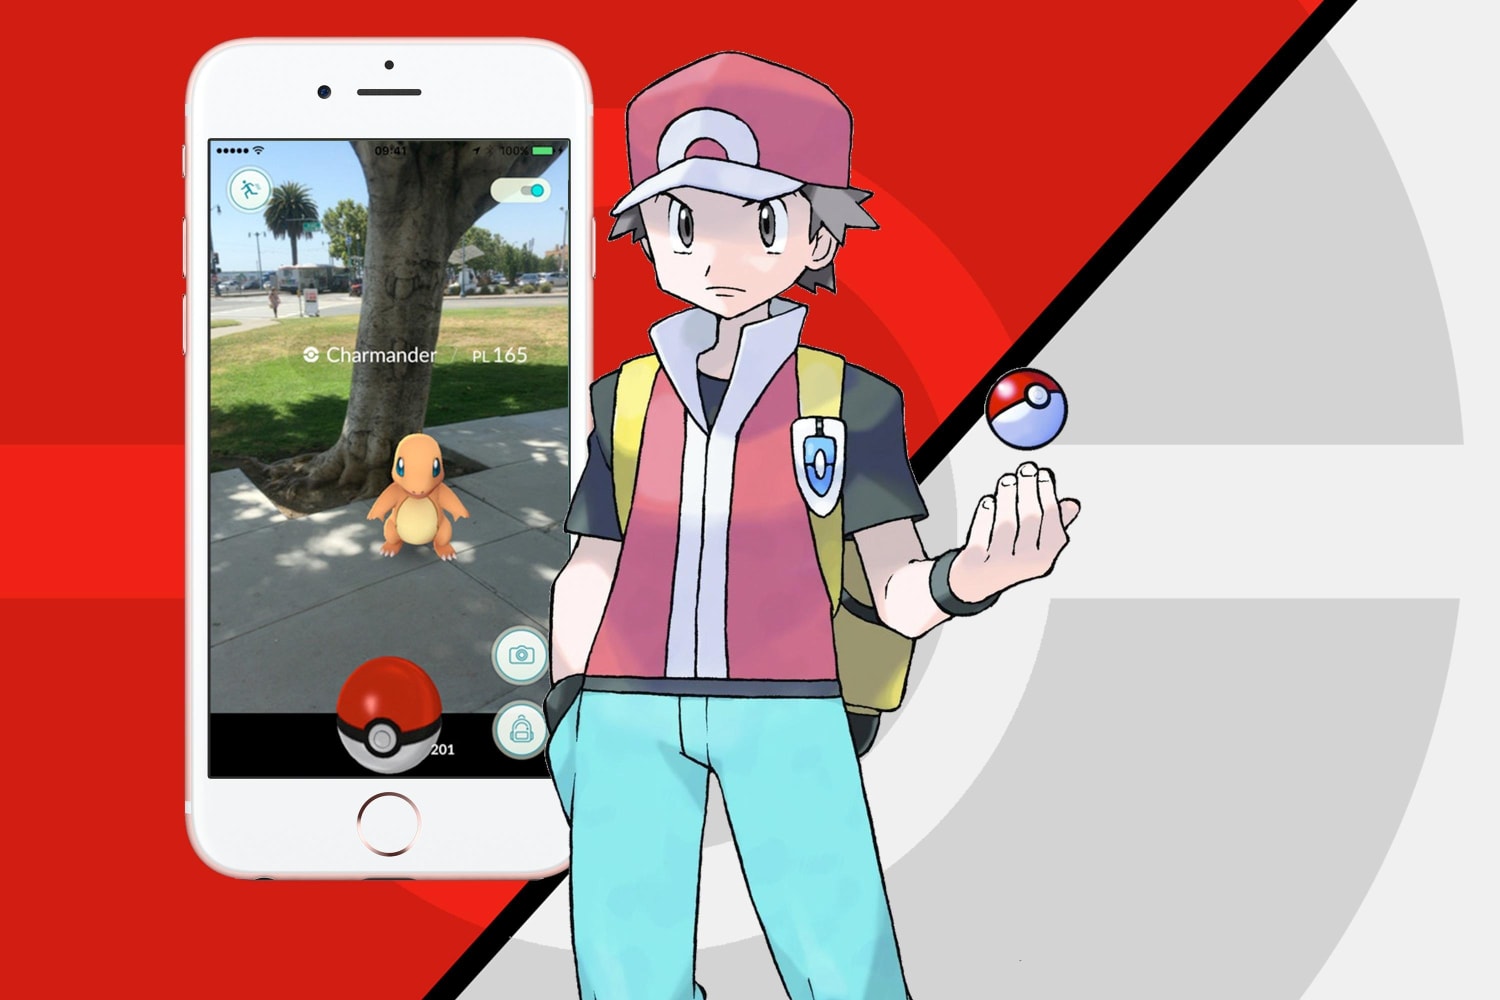 Pokémon Trainer Club login update coming, Niantic warns users to remember  username and password